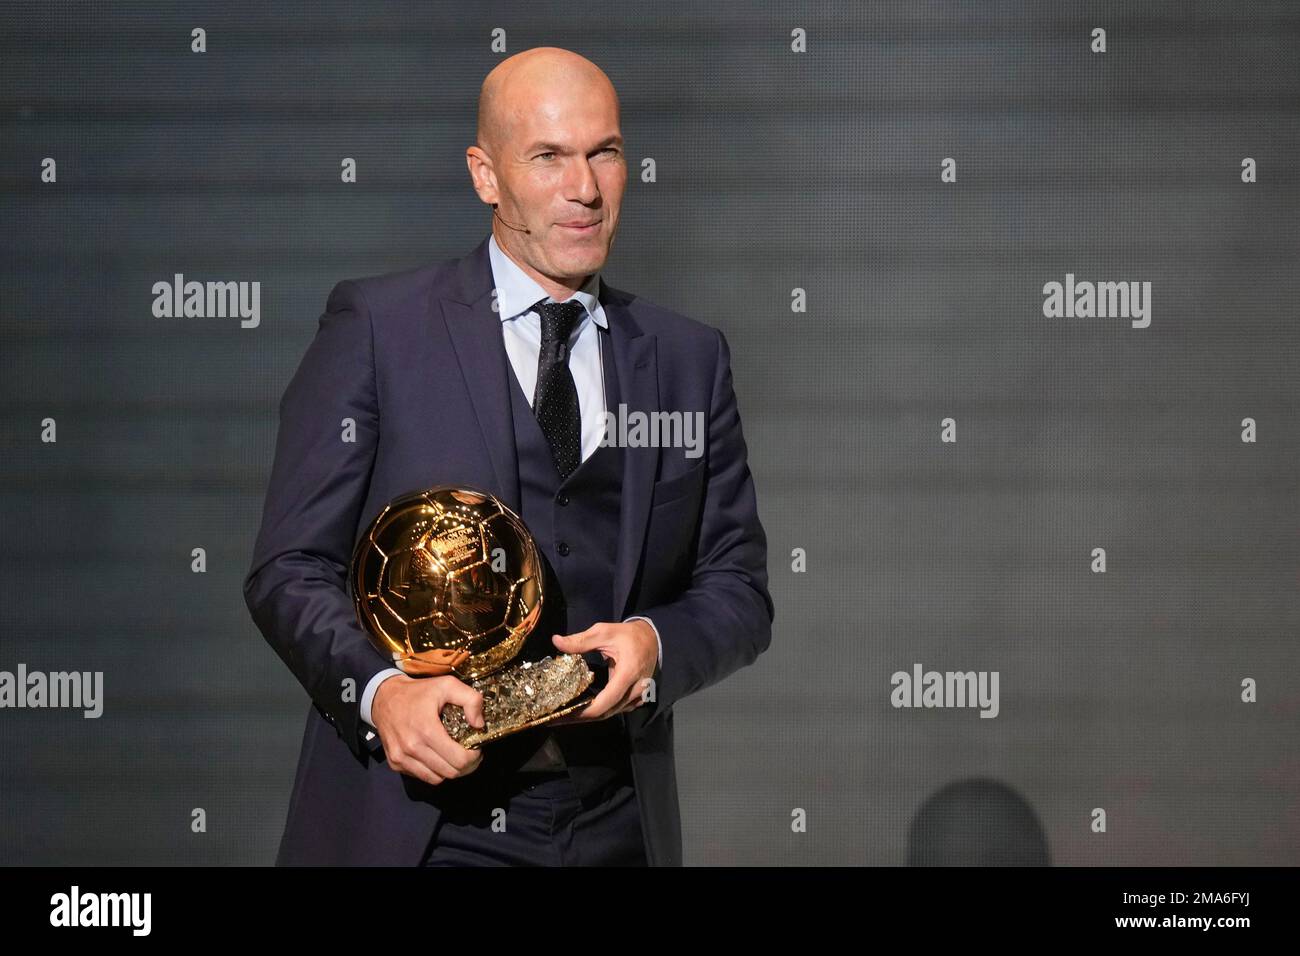 Former soccer player and manager Zinedine Zidane presents the 2022 Ballon d' Or trophy during the 66th Ballon d'Or ceremony at Theatre du Chatelet in  Paris, France, Monday, Oct. 17, 2022. (AP Photo/Francois